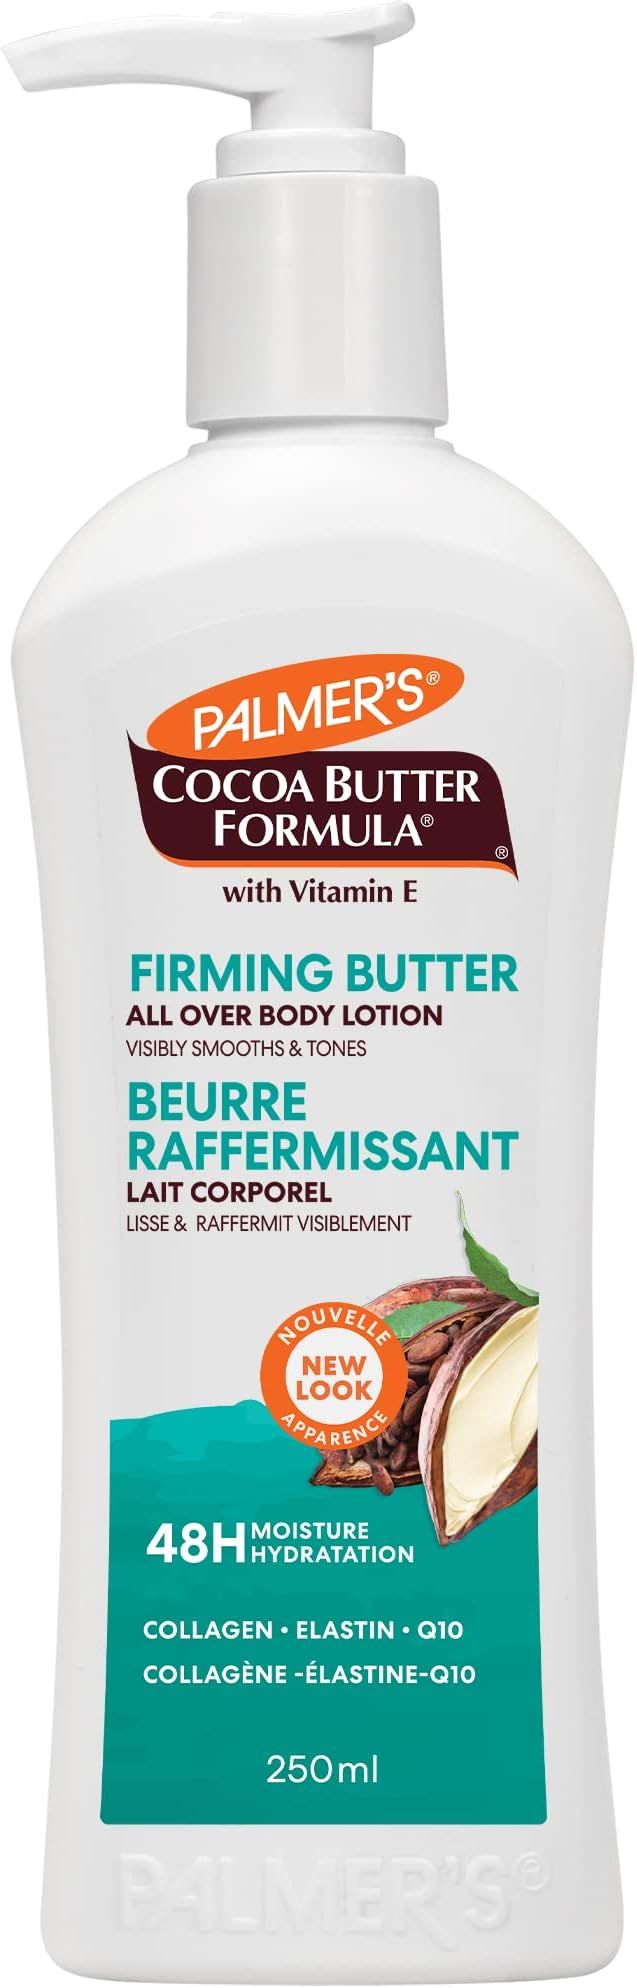 Palmer's Cocoa Butter Formula firming butter body lotion, 250ml | Amazon (CA)